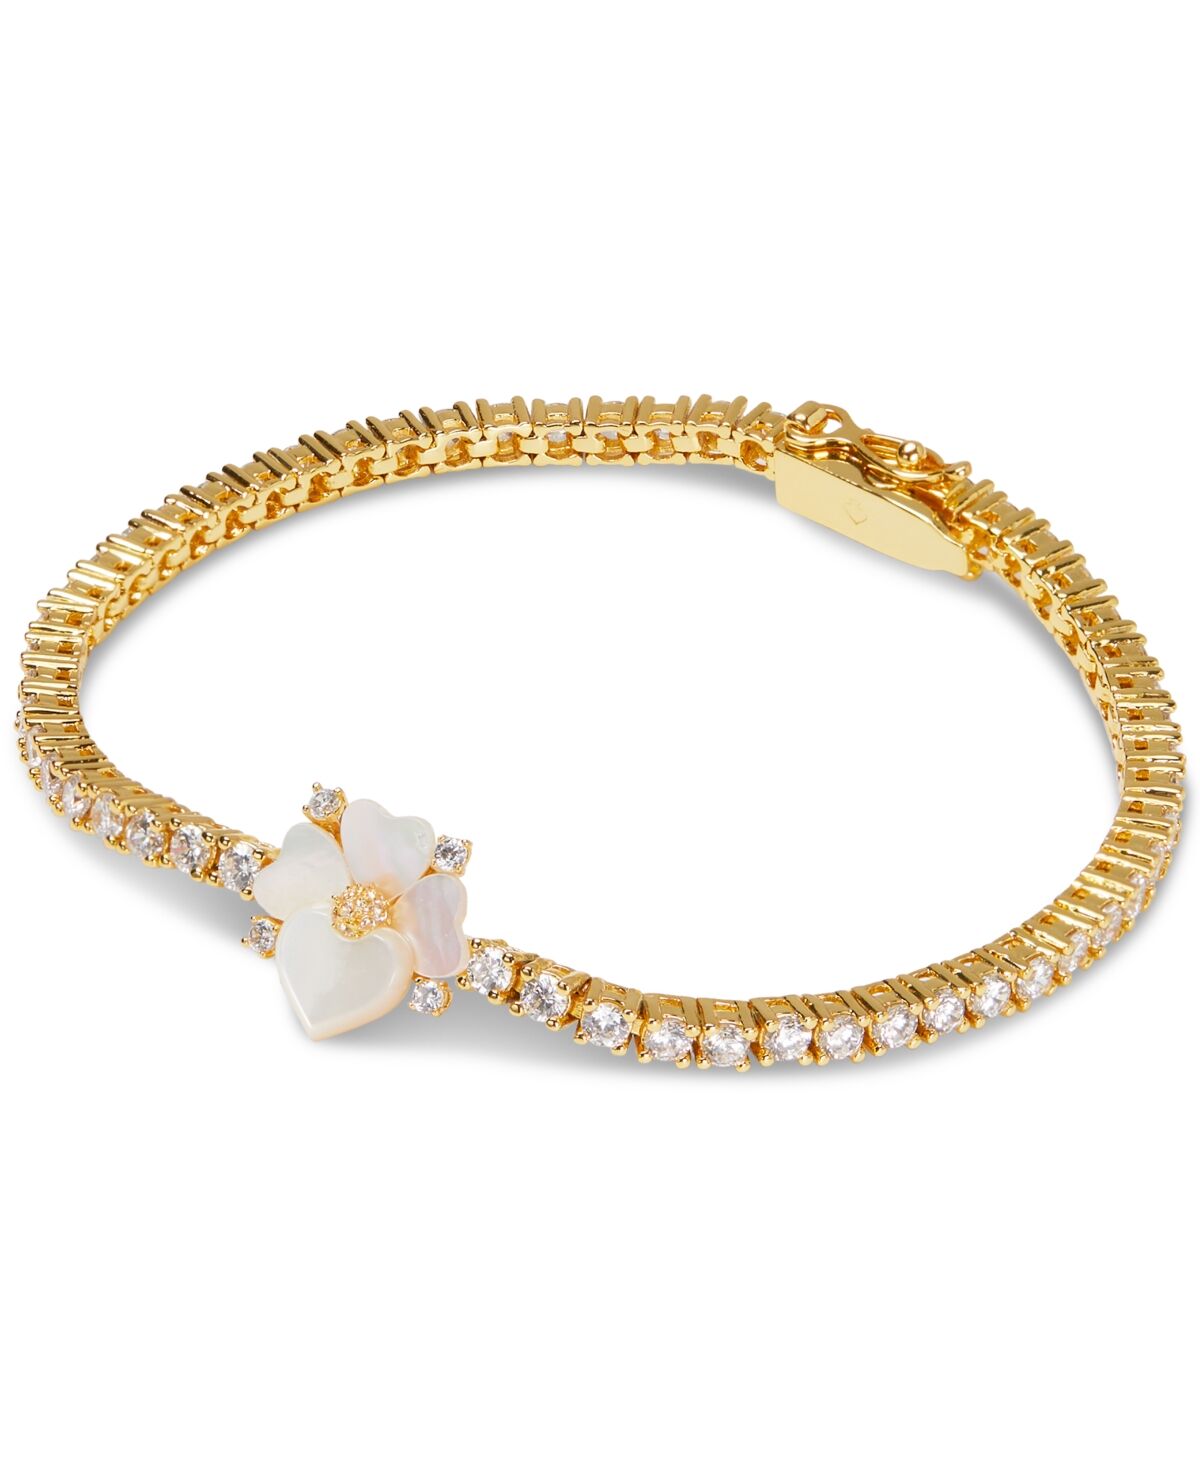 Kate Spade New York Gold-Tone Mother-of-Pearl Pansy Crystal Tennis Bracelet - White Multi